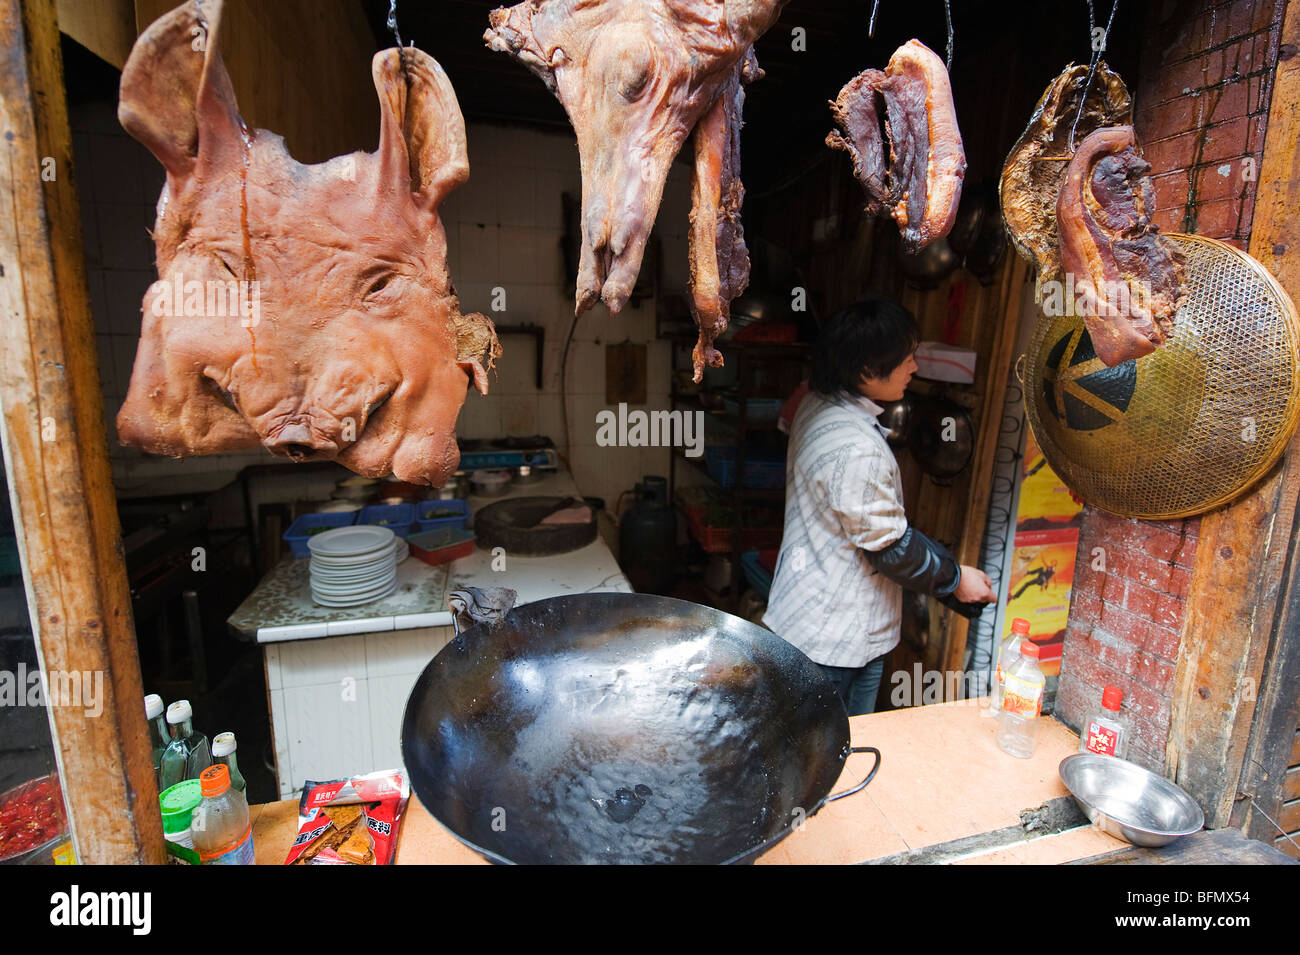 China, Hunan Province, Fenghuang, skinned pig face in a local restaurant Stock Photo